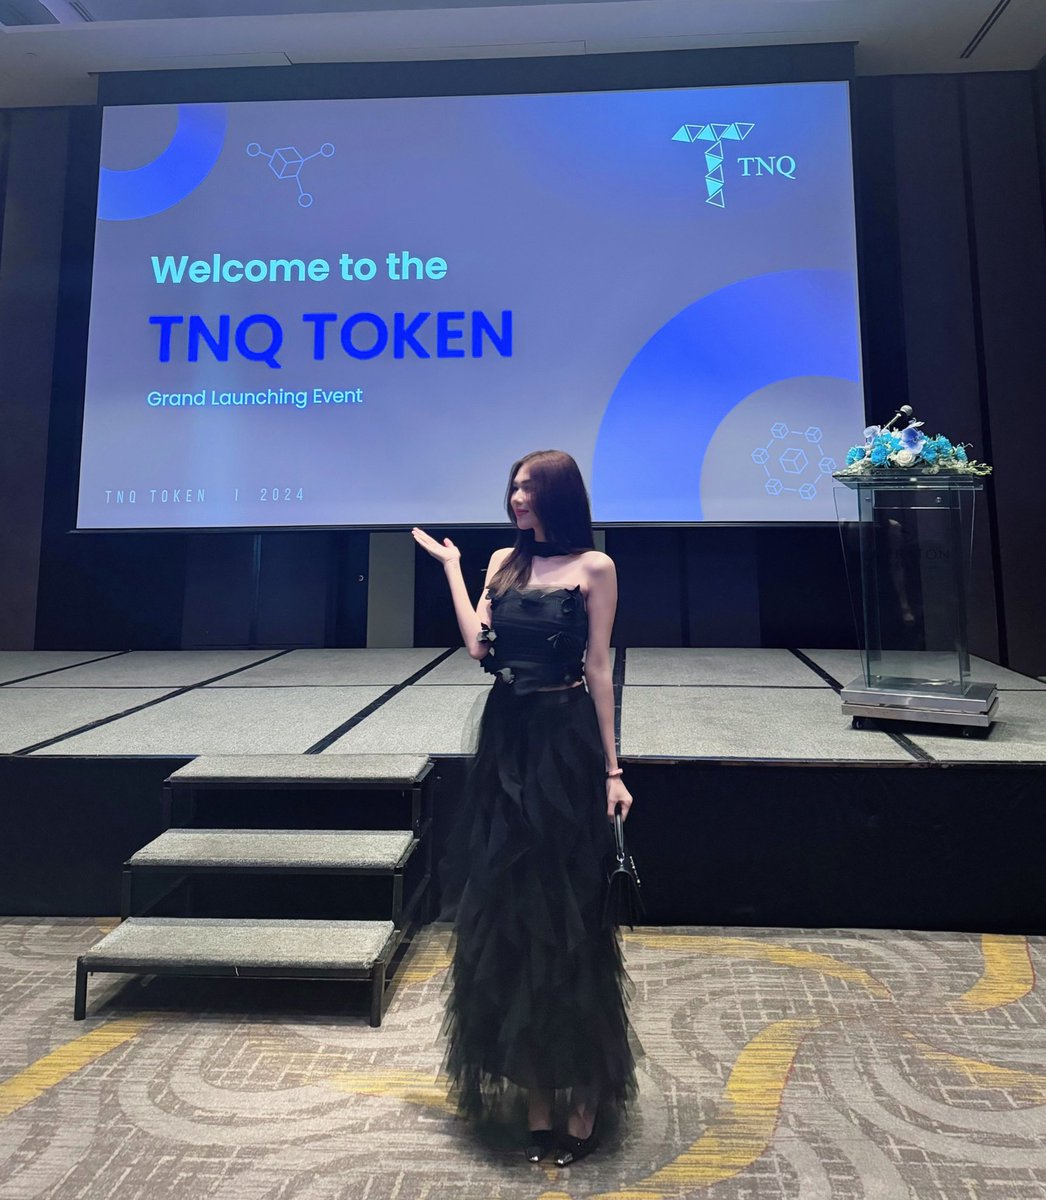 It was an honor for Chau Phuong to be invited participating in the TNQ Token event today The event is a great opportunity for me personally, to be involved in the cryptocurrency and Blockchain technology community. I met a lot of overseas friends here! Phuong also met and…